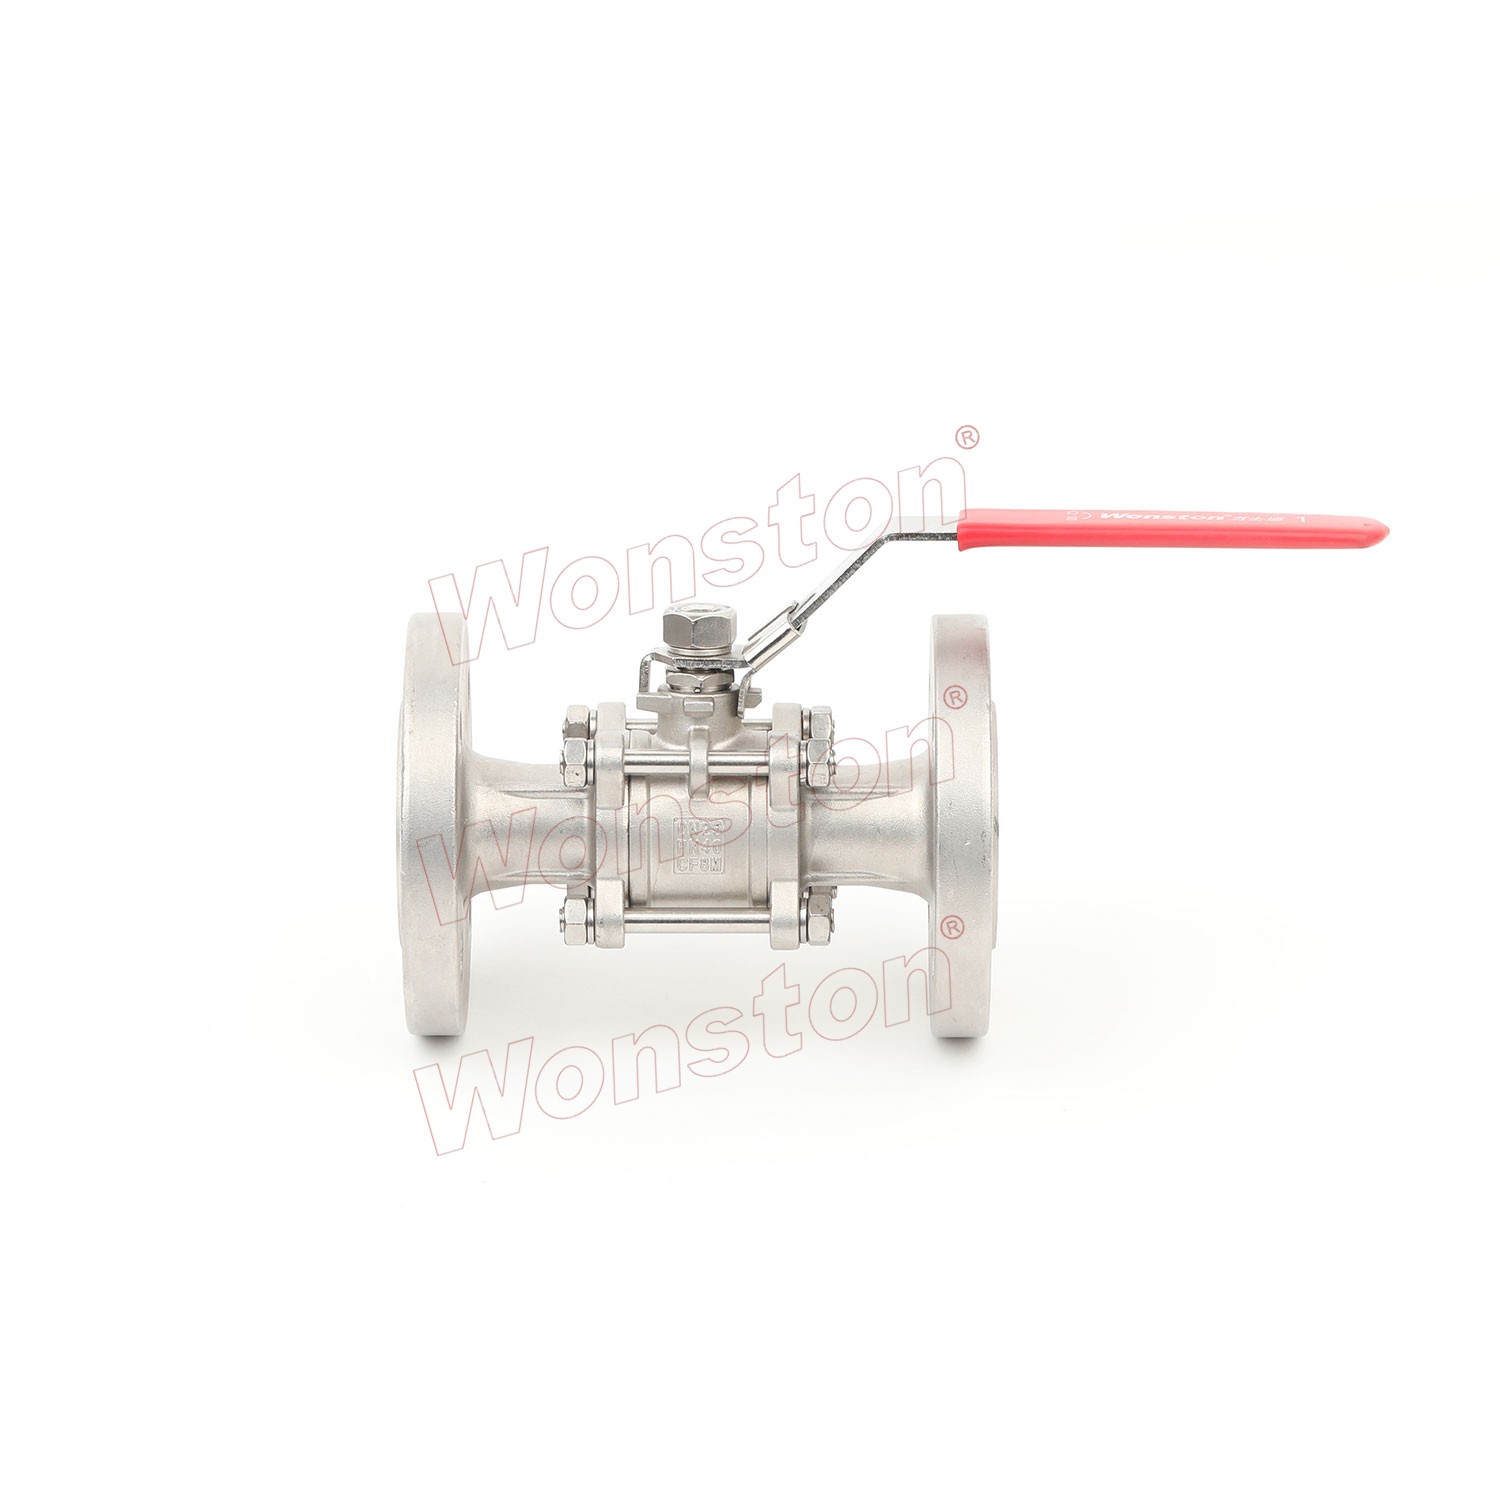 3PC Ball Valve Flanged End DIN PN16 and PN40